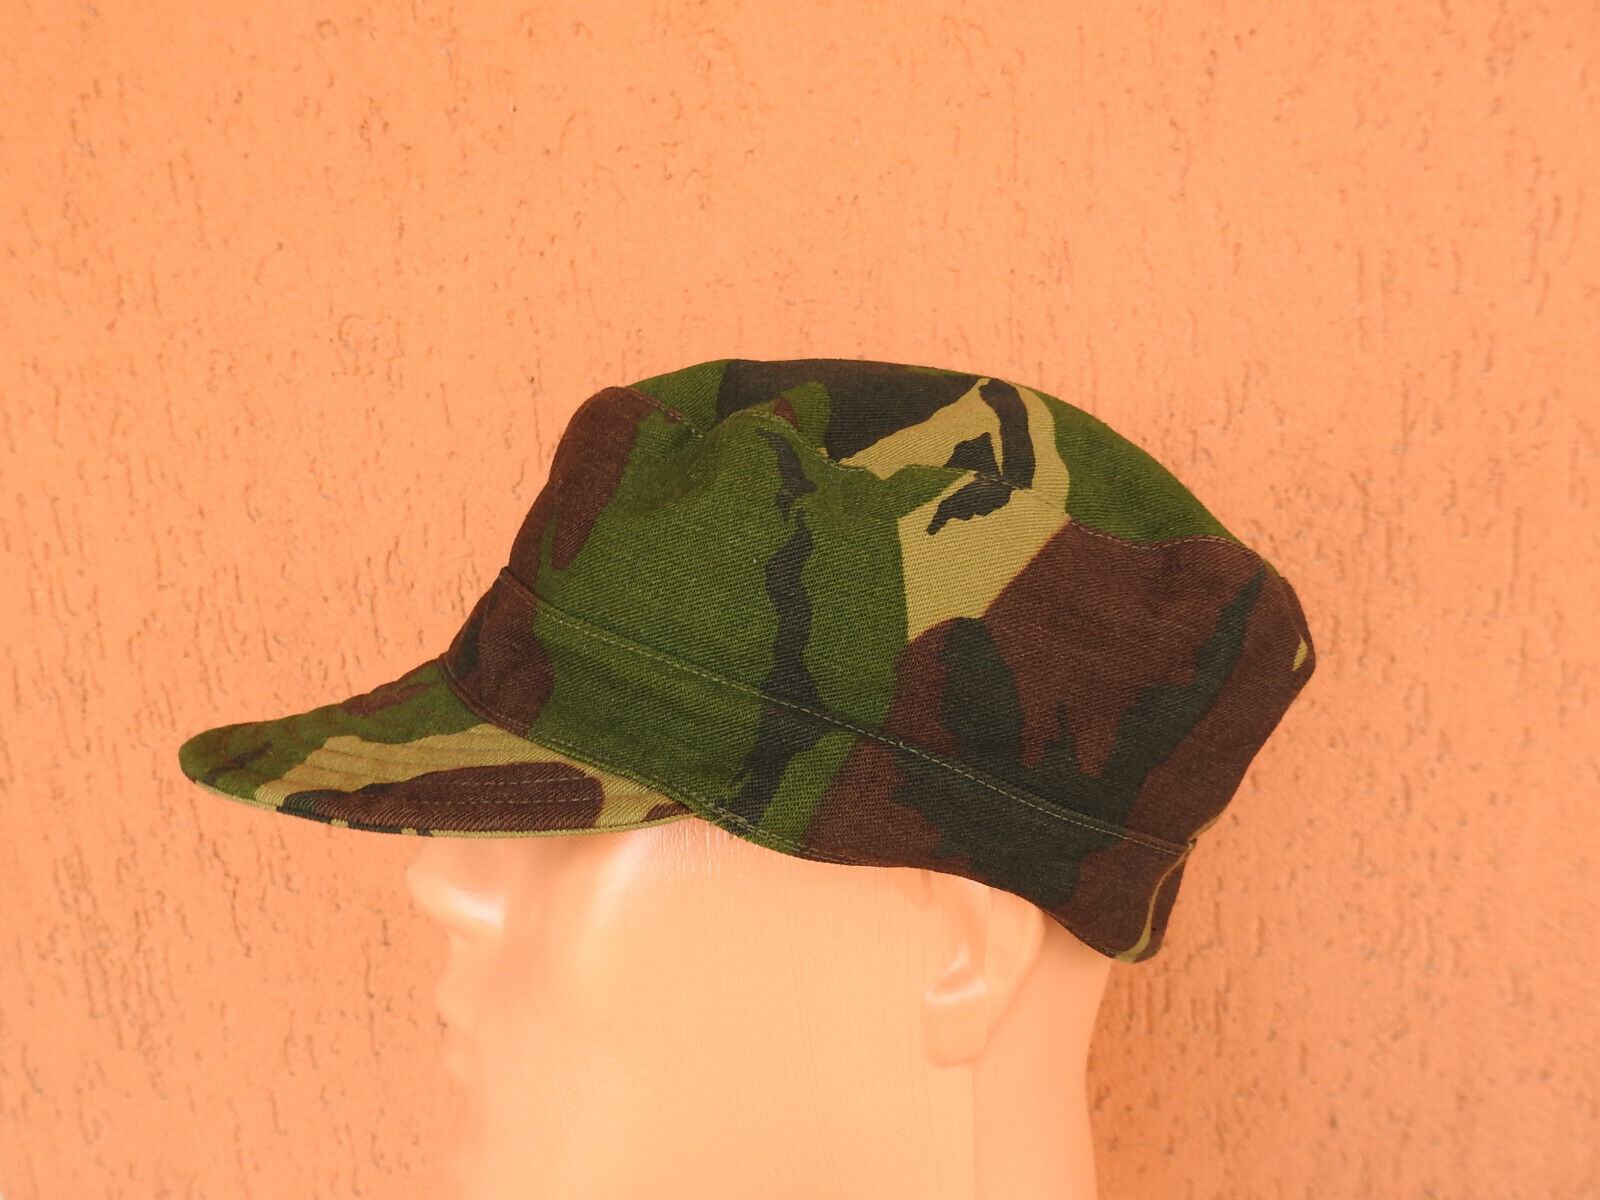 Vintage 90s Dutch Army Cap Hassing-Amersfoort Military Woodland Camo Hat S/M (56